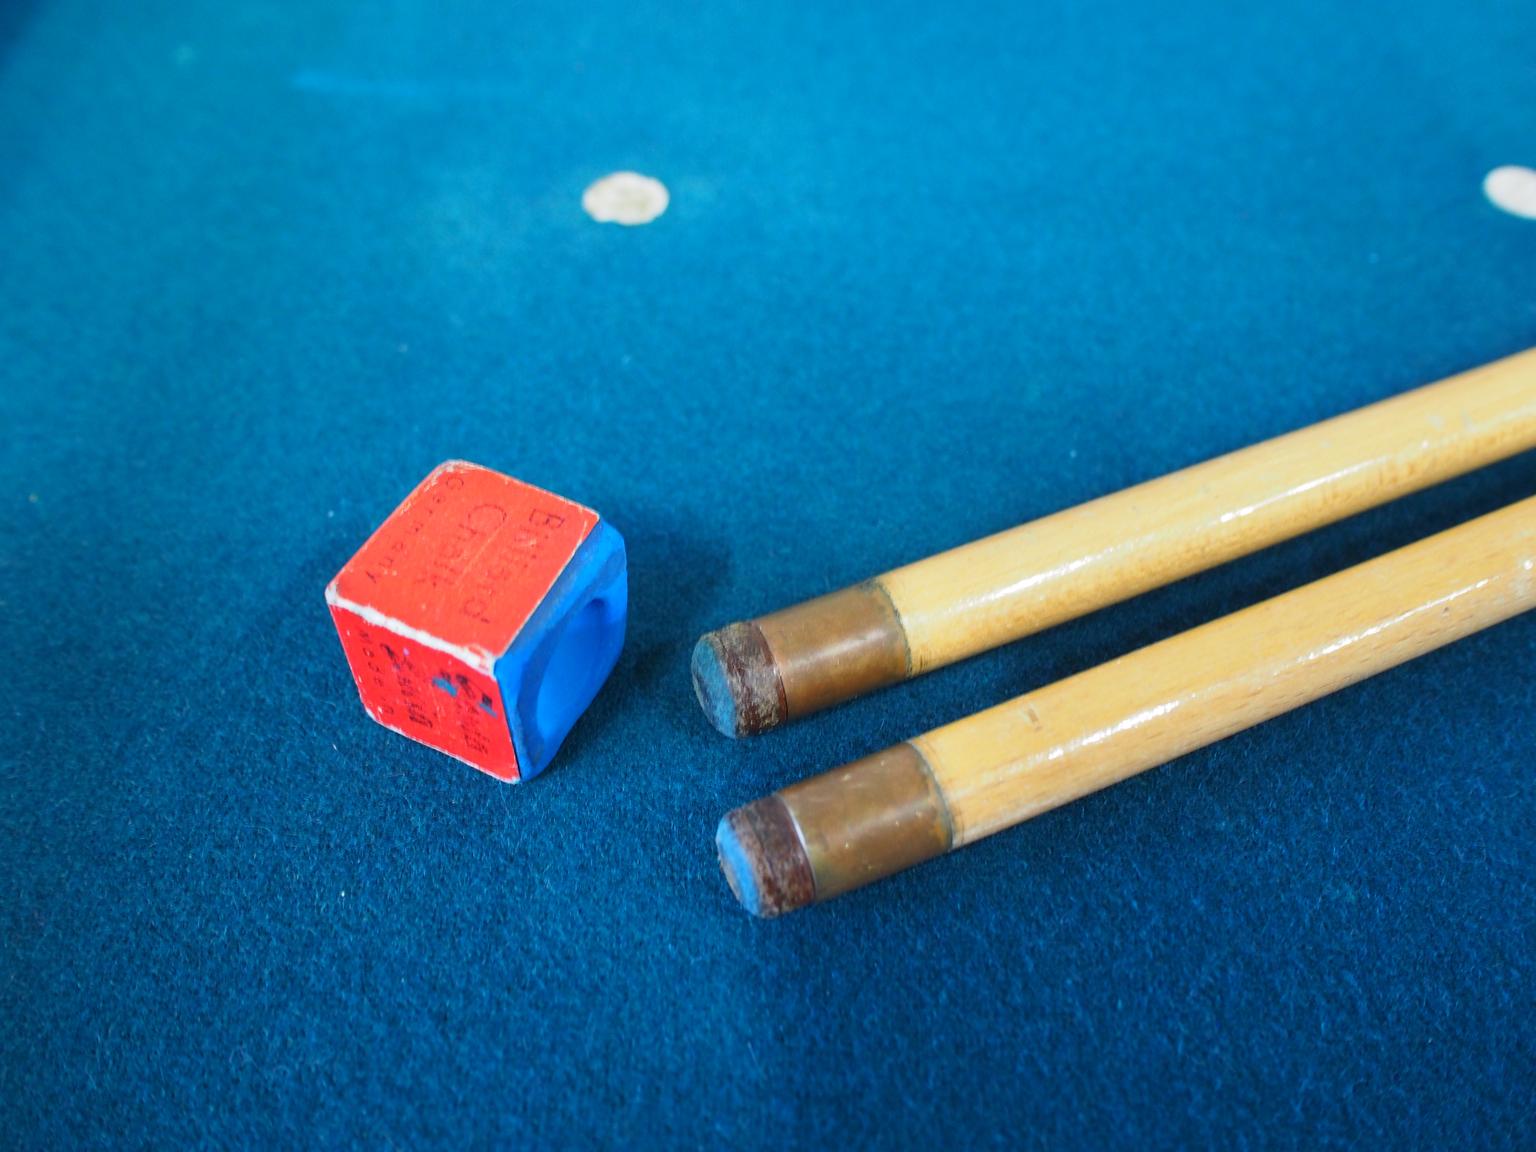 Billiard game from the 1950s with blue playing surface.